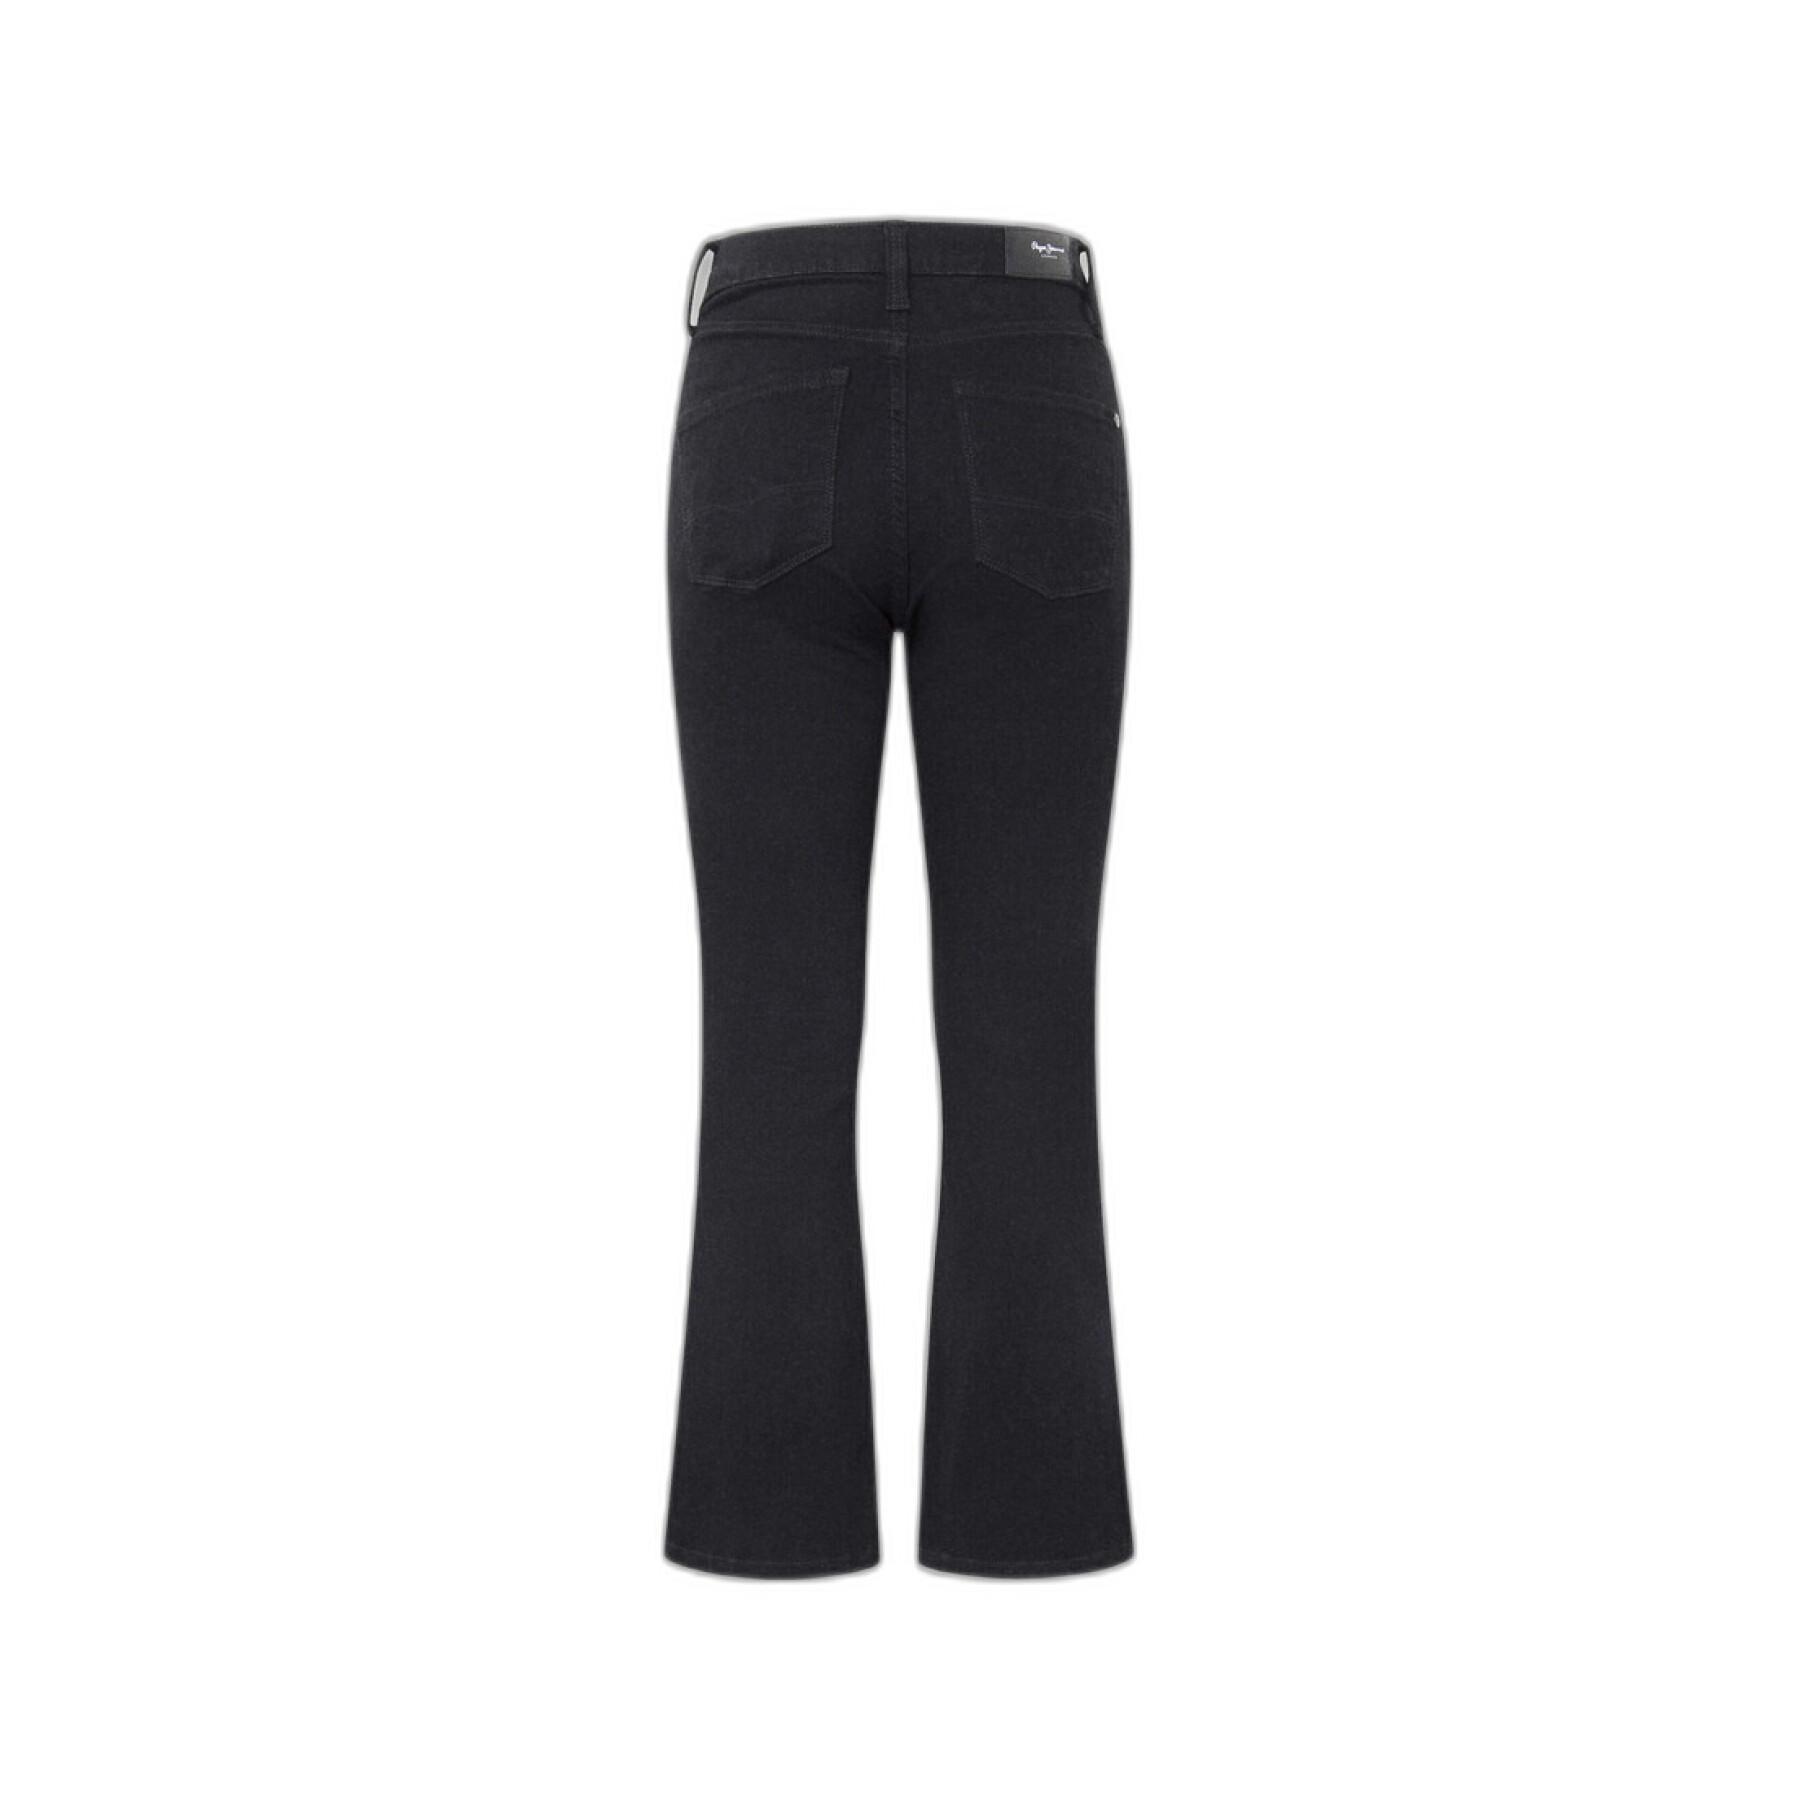 Women's jeans Pepe Jeans Dion Flare